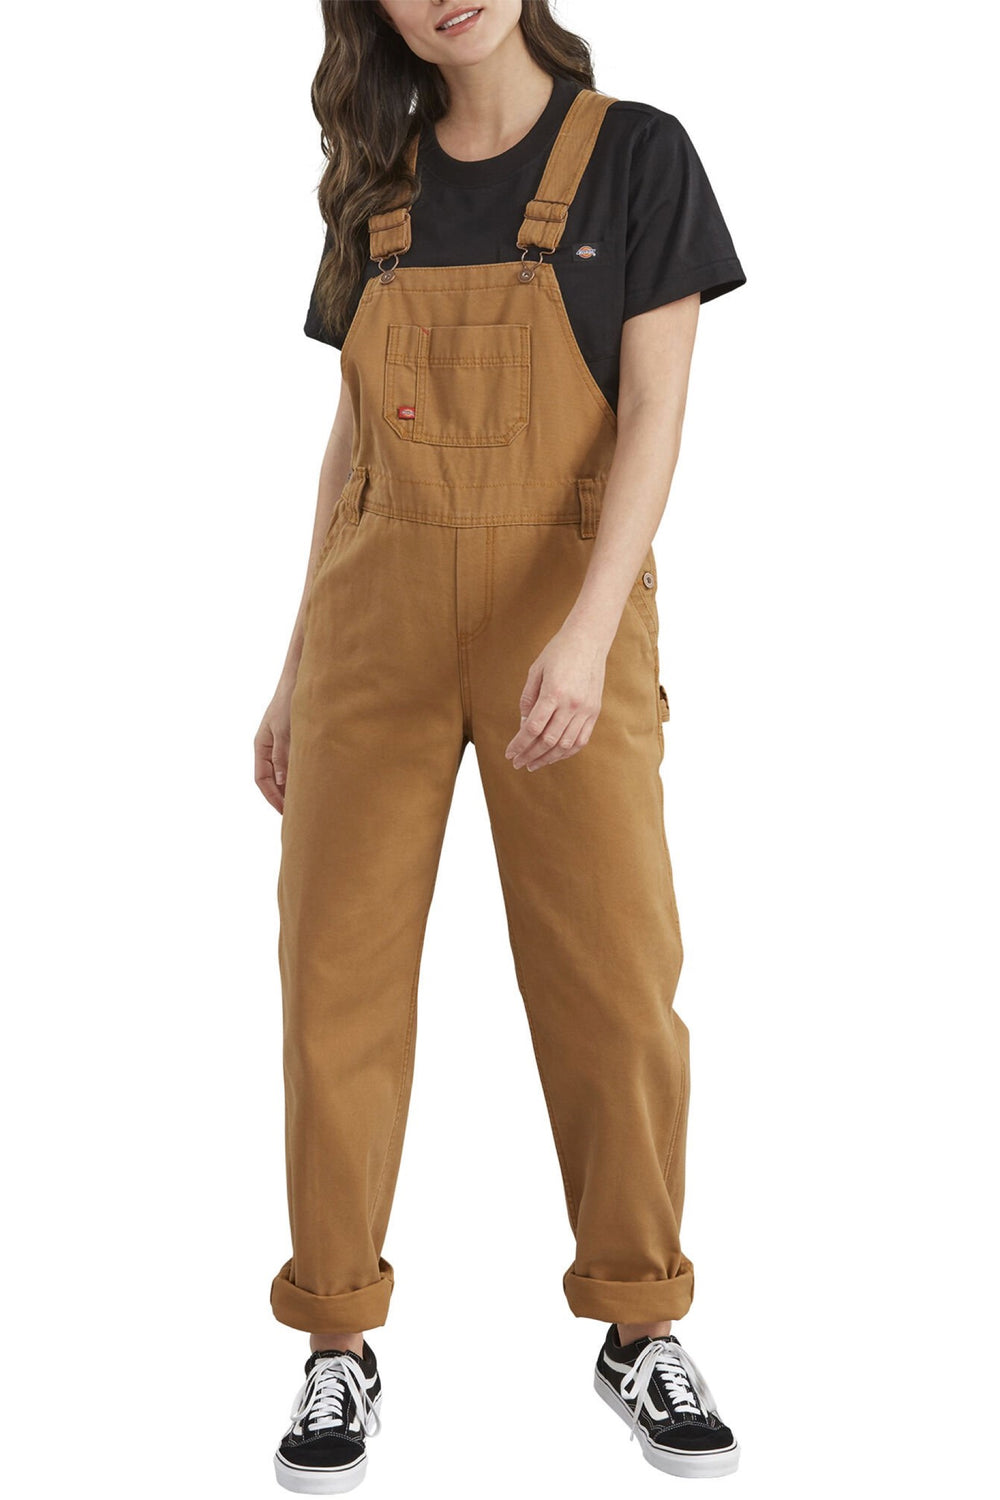 Rinsed Brown Bib Overall